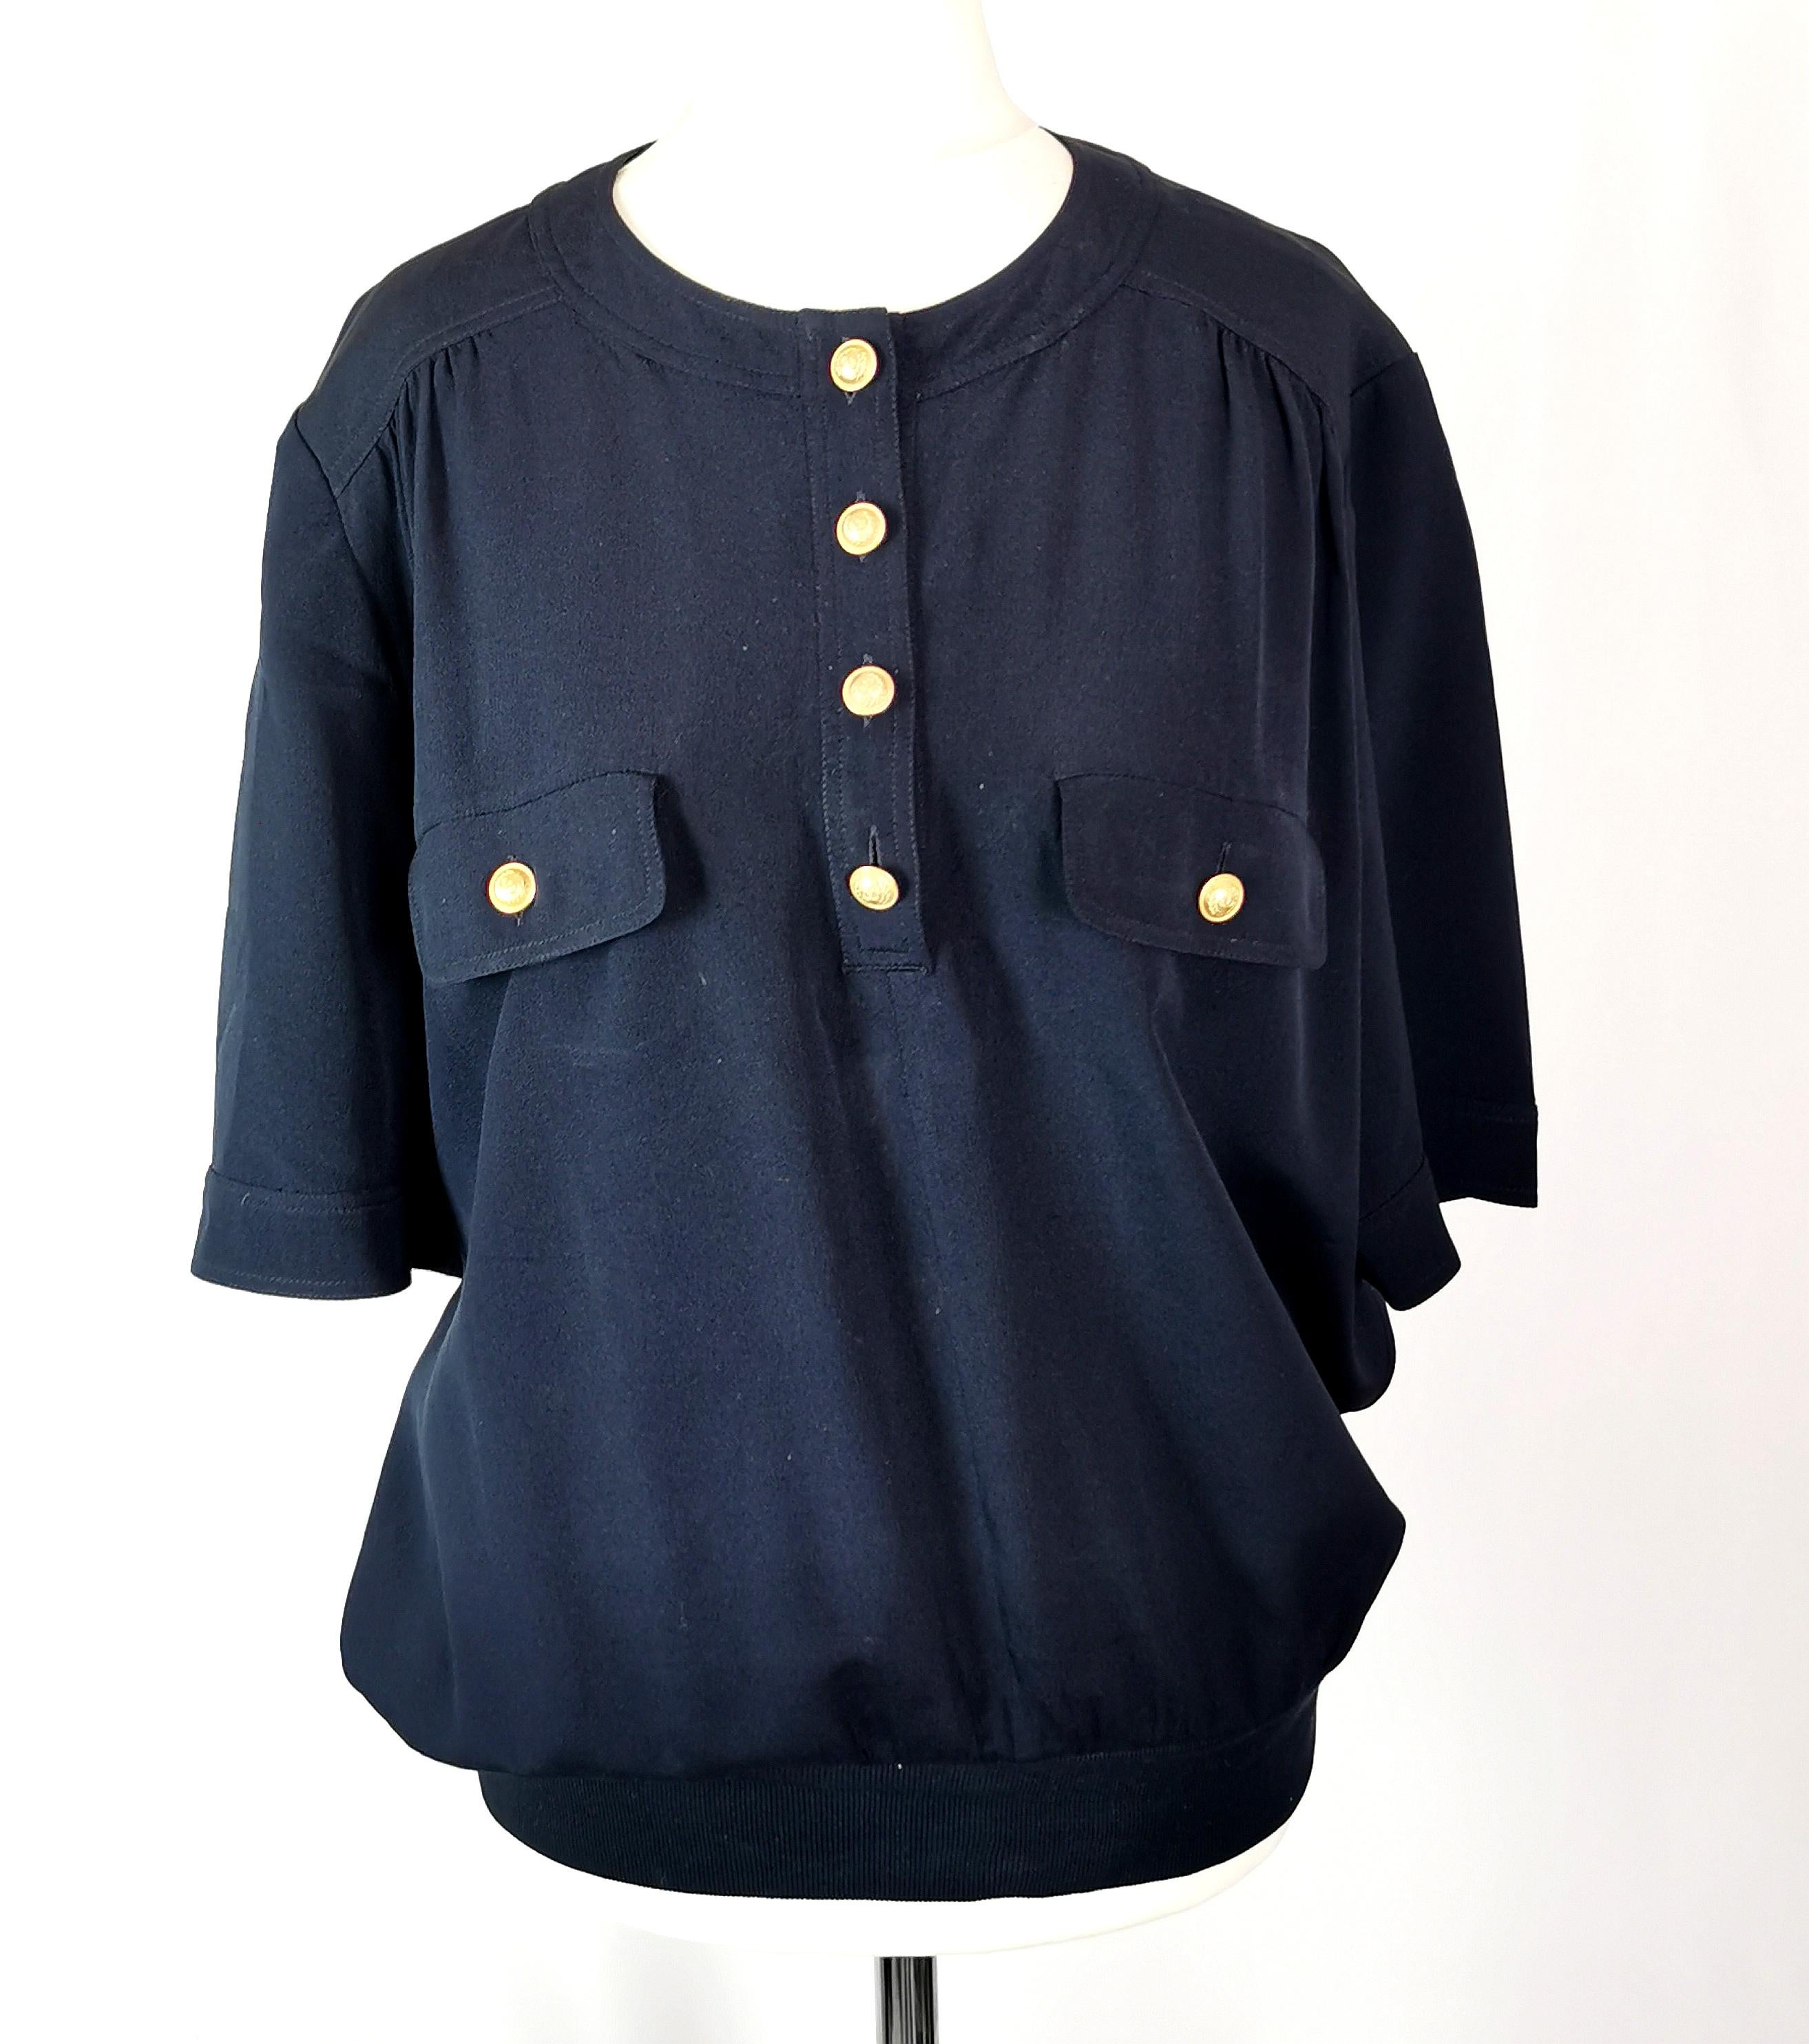 A gorgeous vintage c1980s Valentino Miss V navy blue crepe Silk blouse.

It has a lovely nautical vibe to it in a pullover style with a knitted waistband and short sleeves.

It has buttons half the way up with gold tone monogrammed buttons.

It has